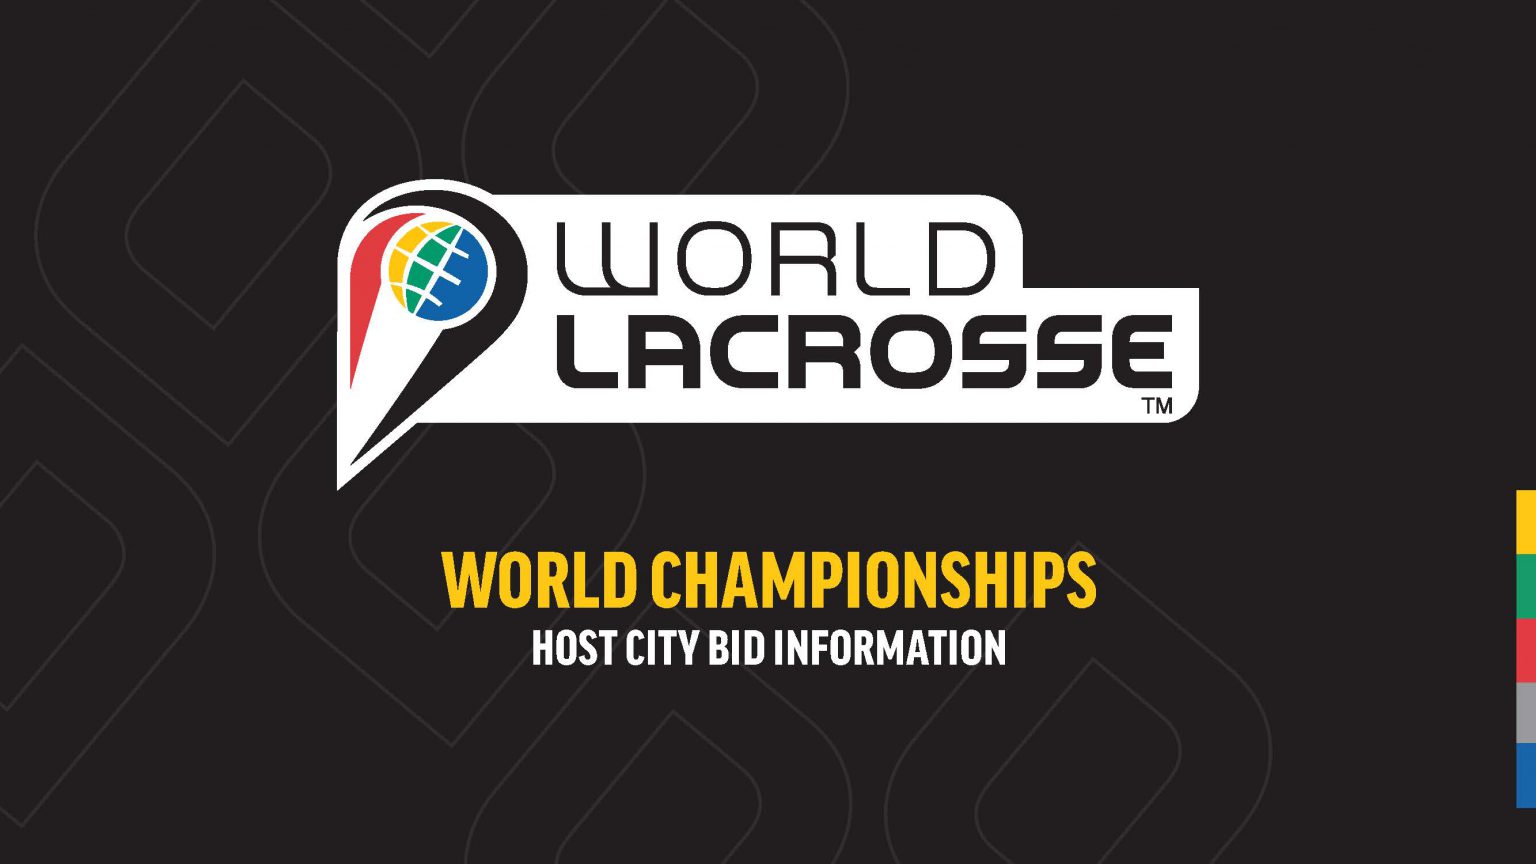 Host city bidding process open for World Lacrosse championships from